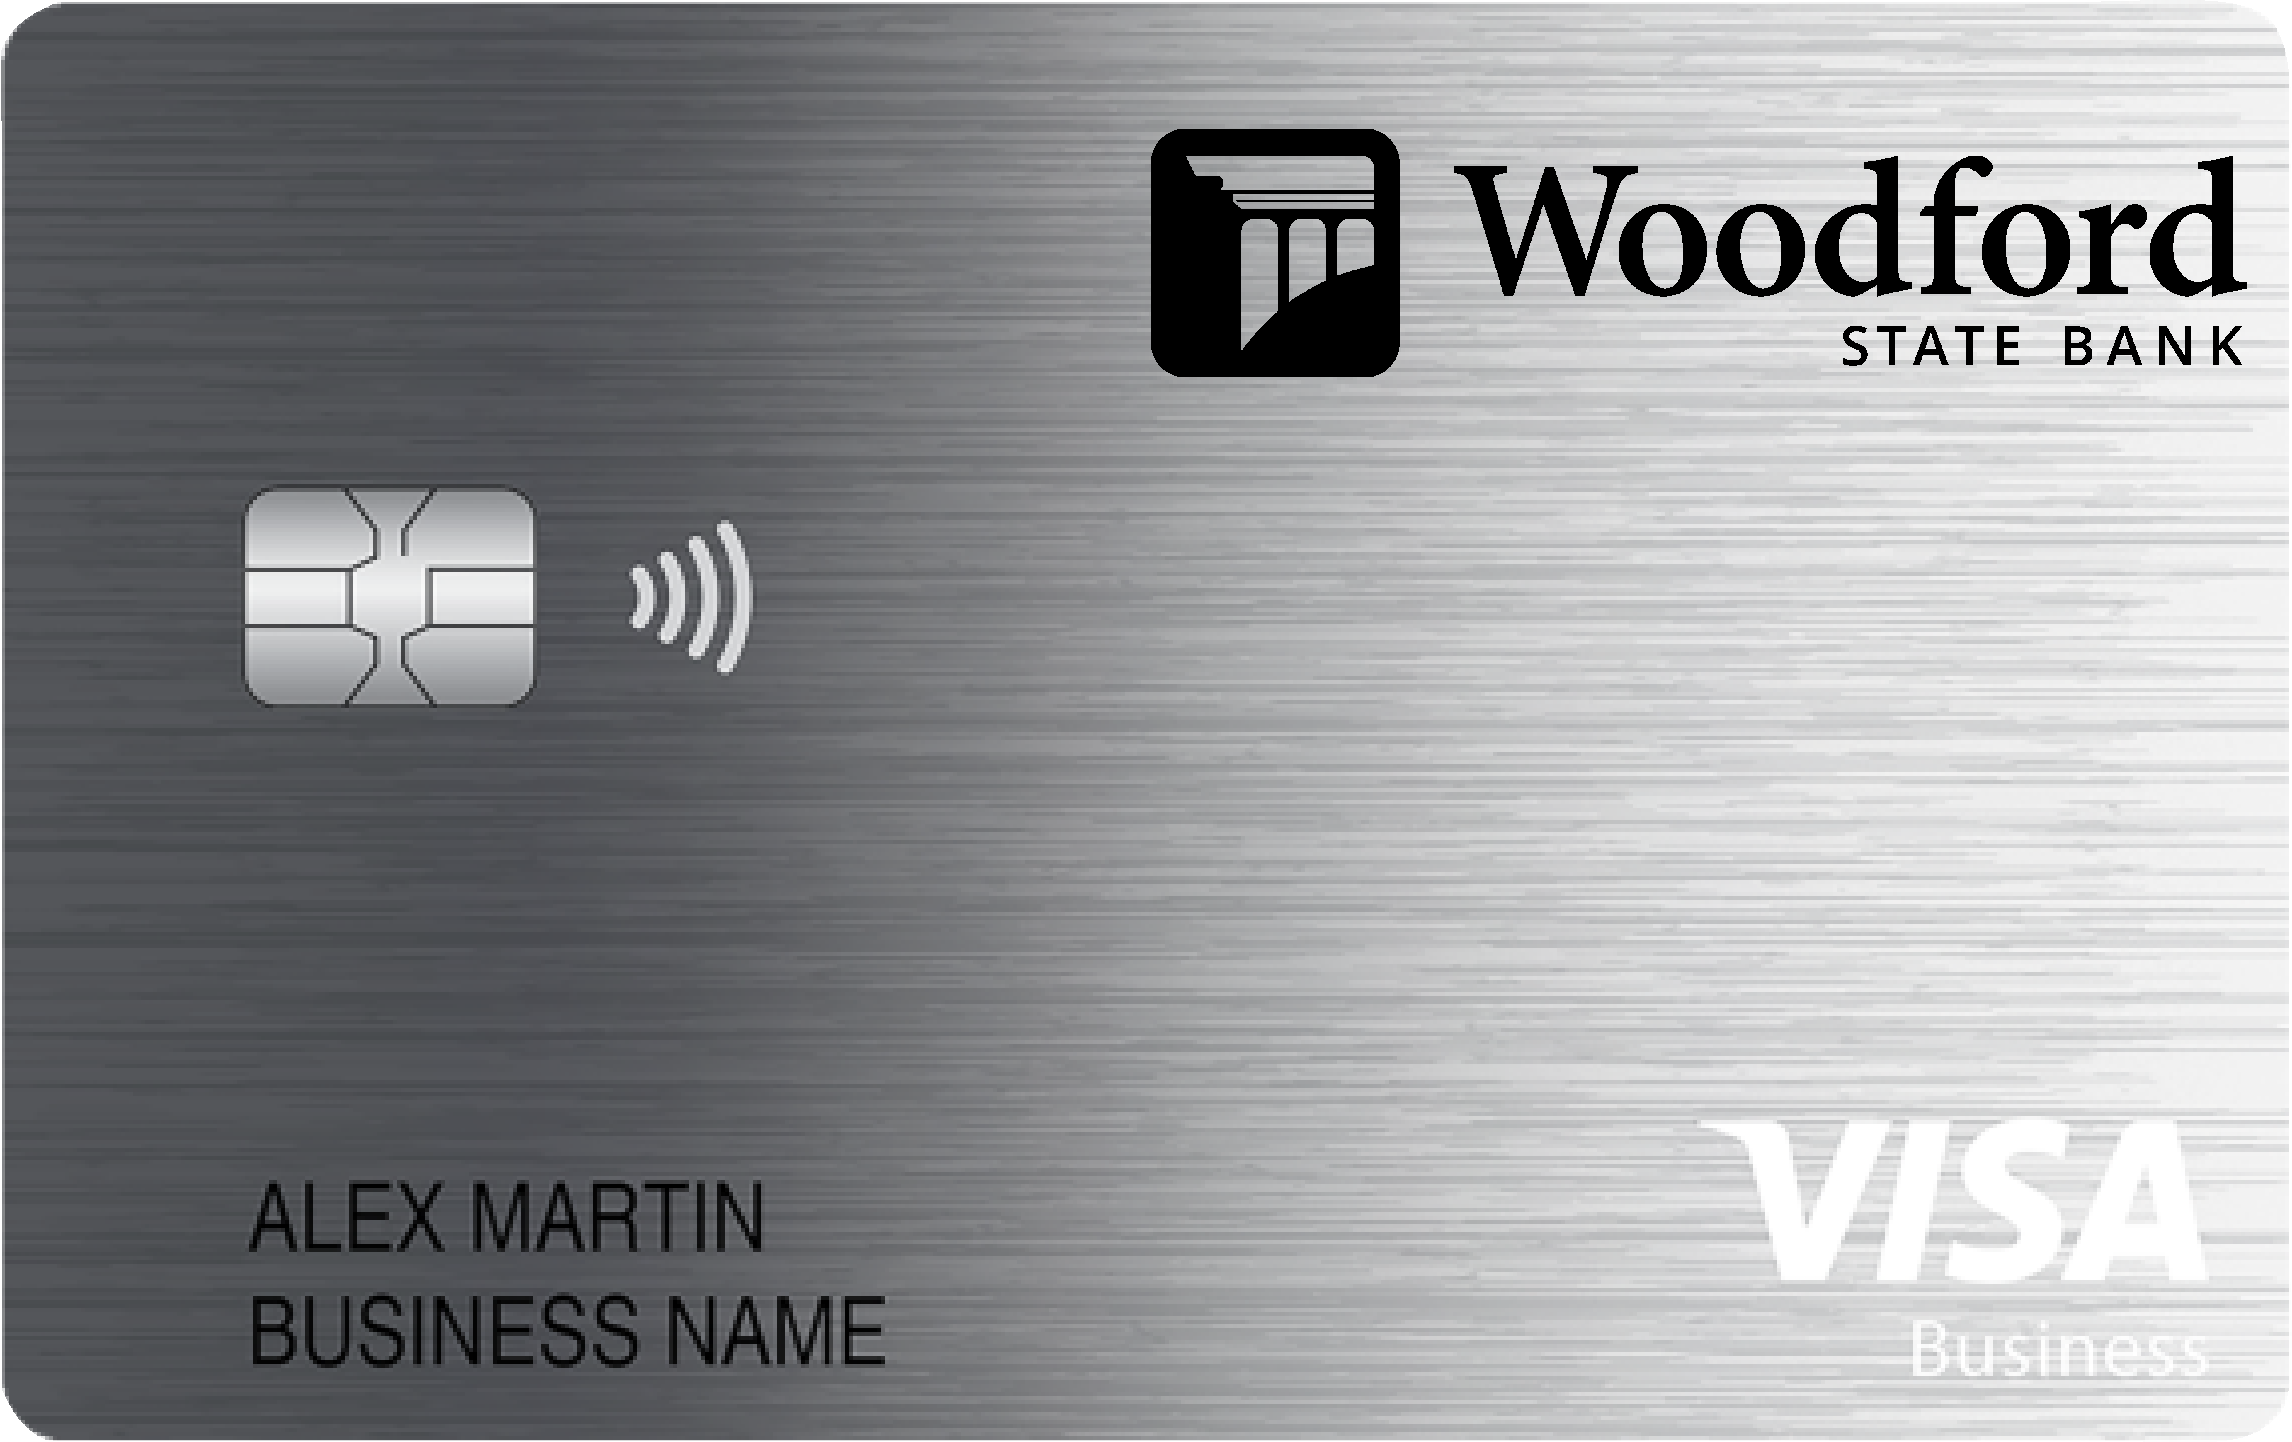 Woodford State Bank Business Real Rewards Card